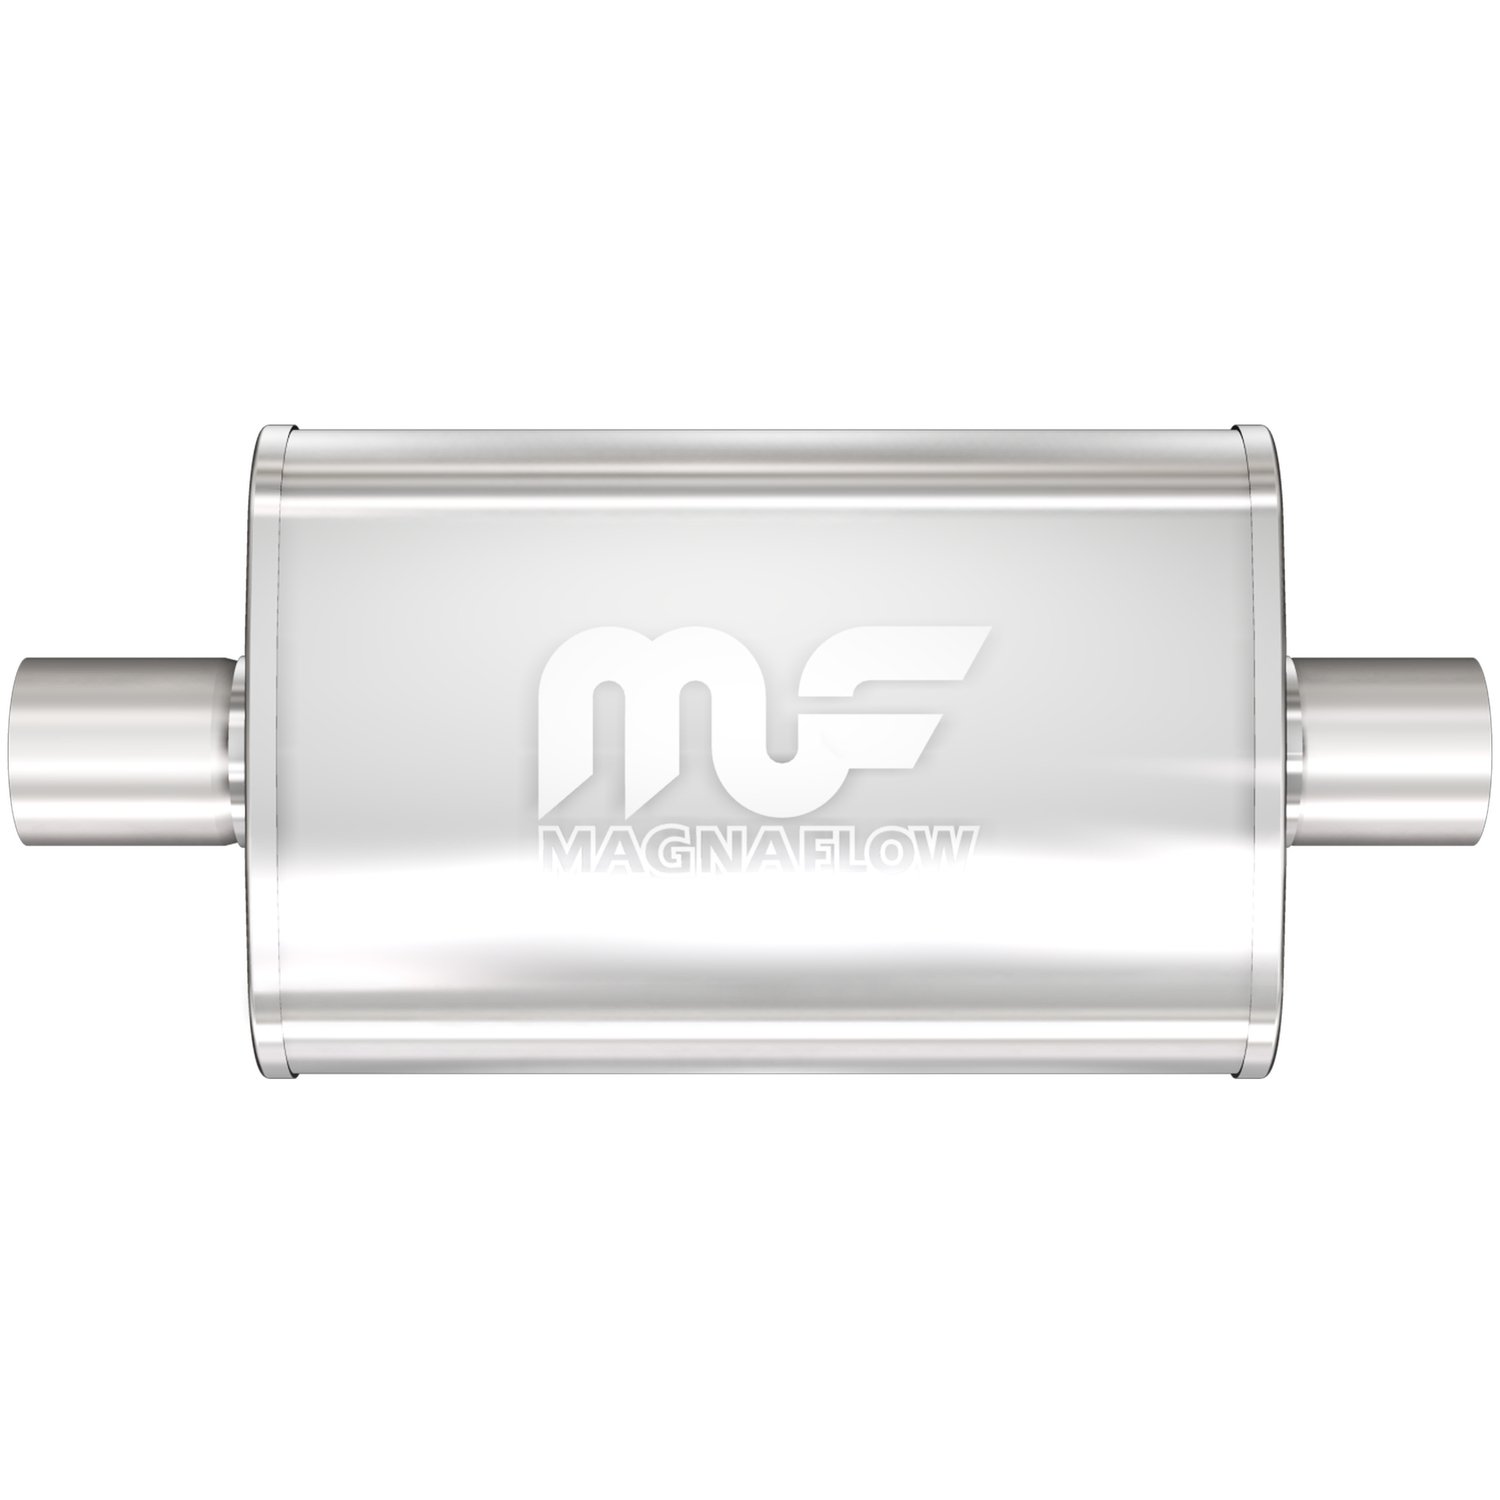 4" x 9" Oval Muffler Center In/Center Out: 3"/3" Body Length: 18" Overall Length: 24" Core Size: 3" Satin Finish